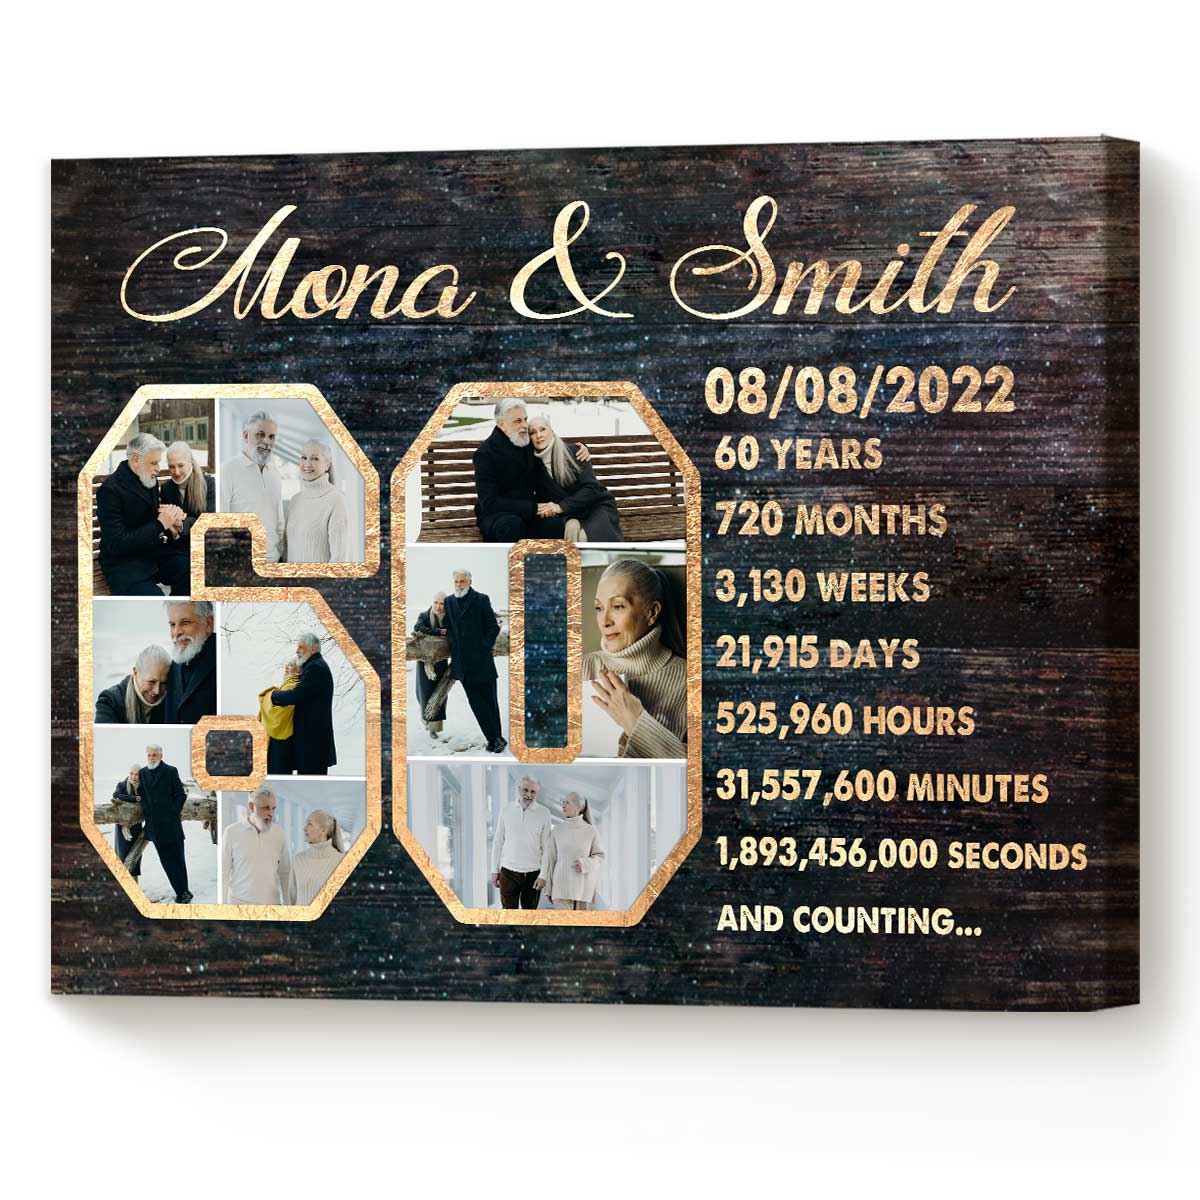 85 of The Best Anniversary Gifts by Year | 60th wedding anniversary gifts, 60th  anniversary gifts, Diamond wedding anniversary gifts